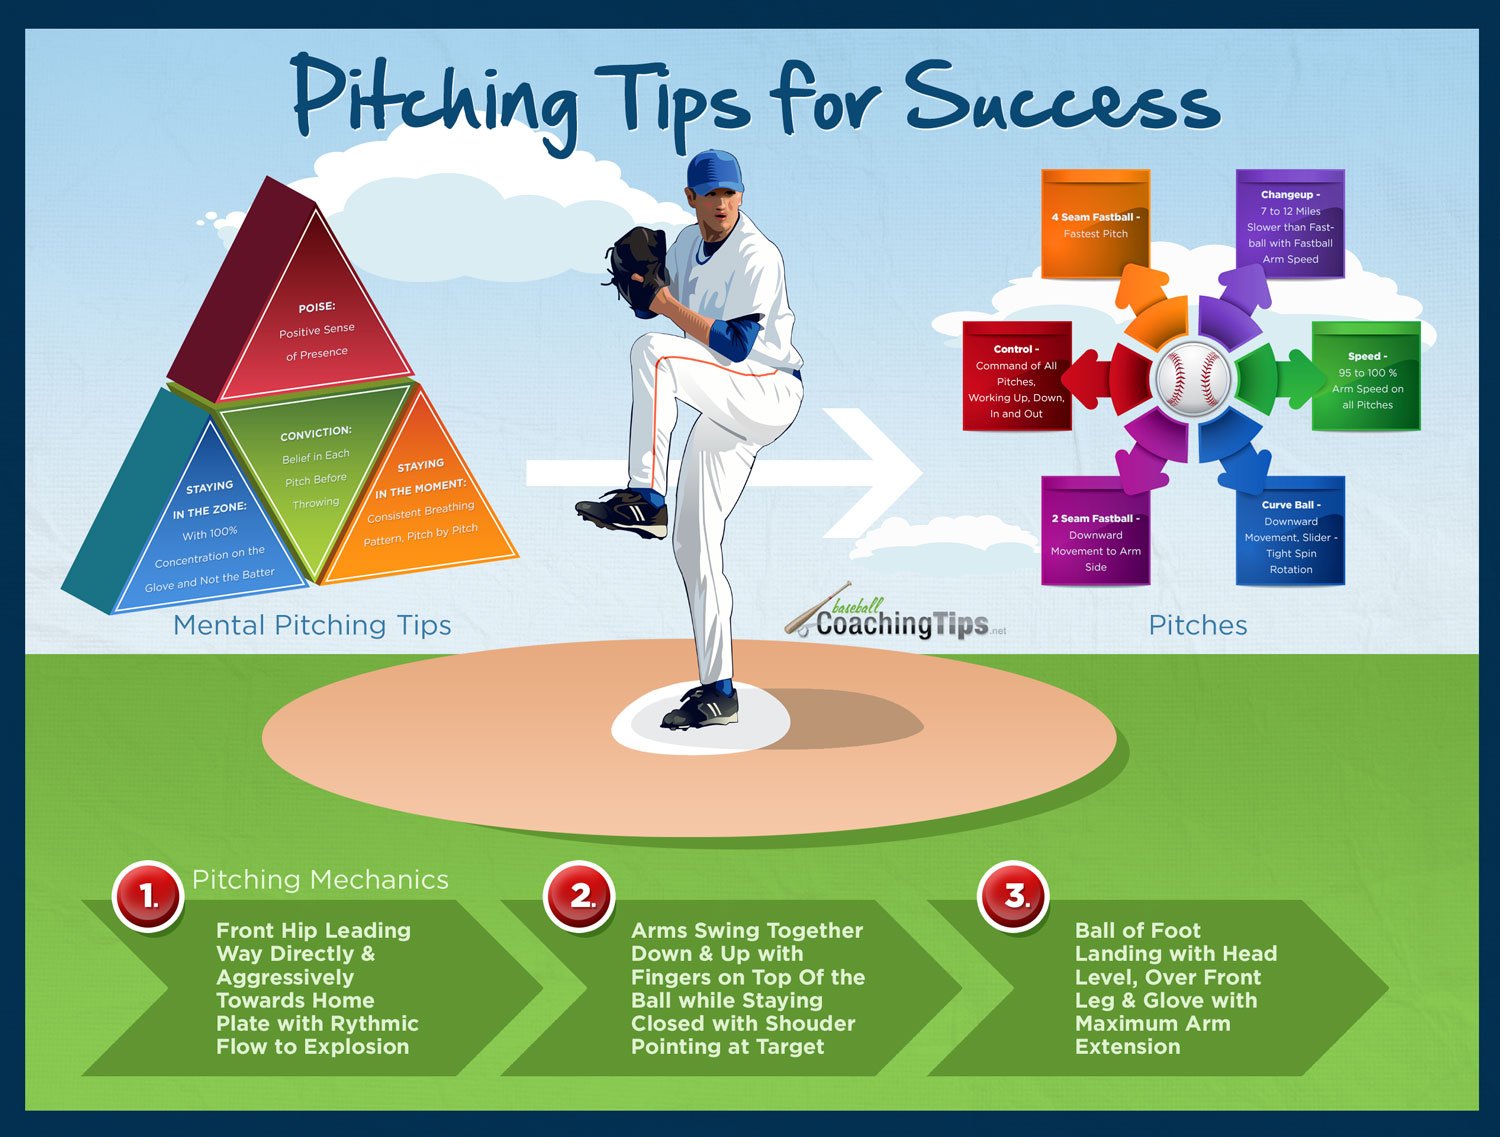 Pitching Tips for Success